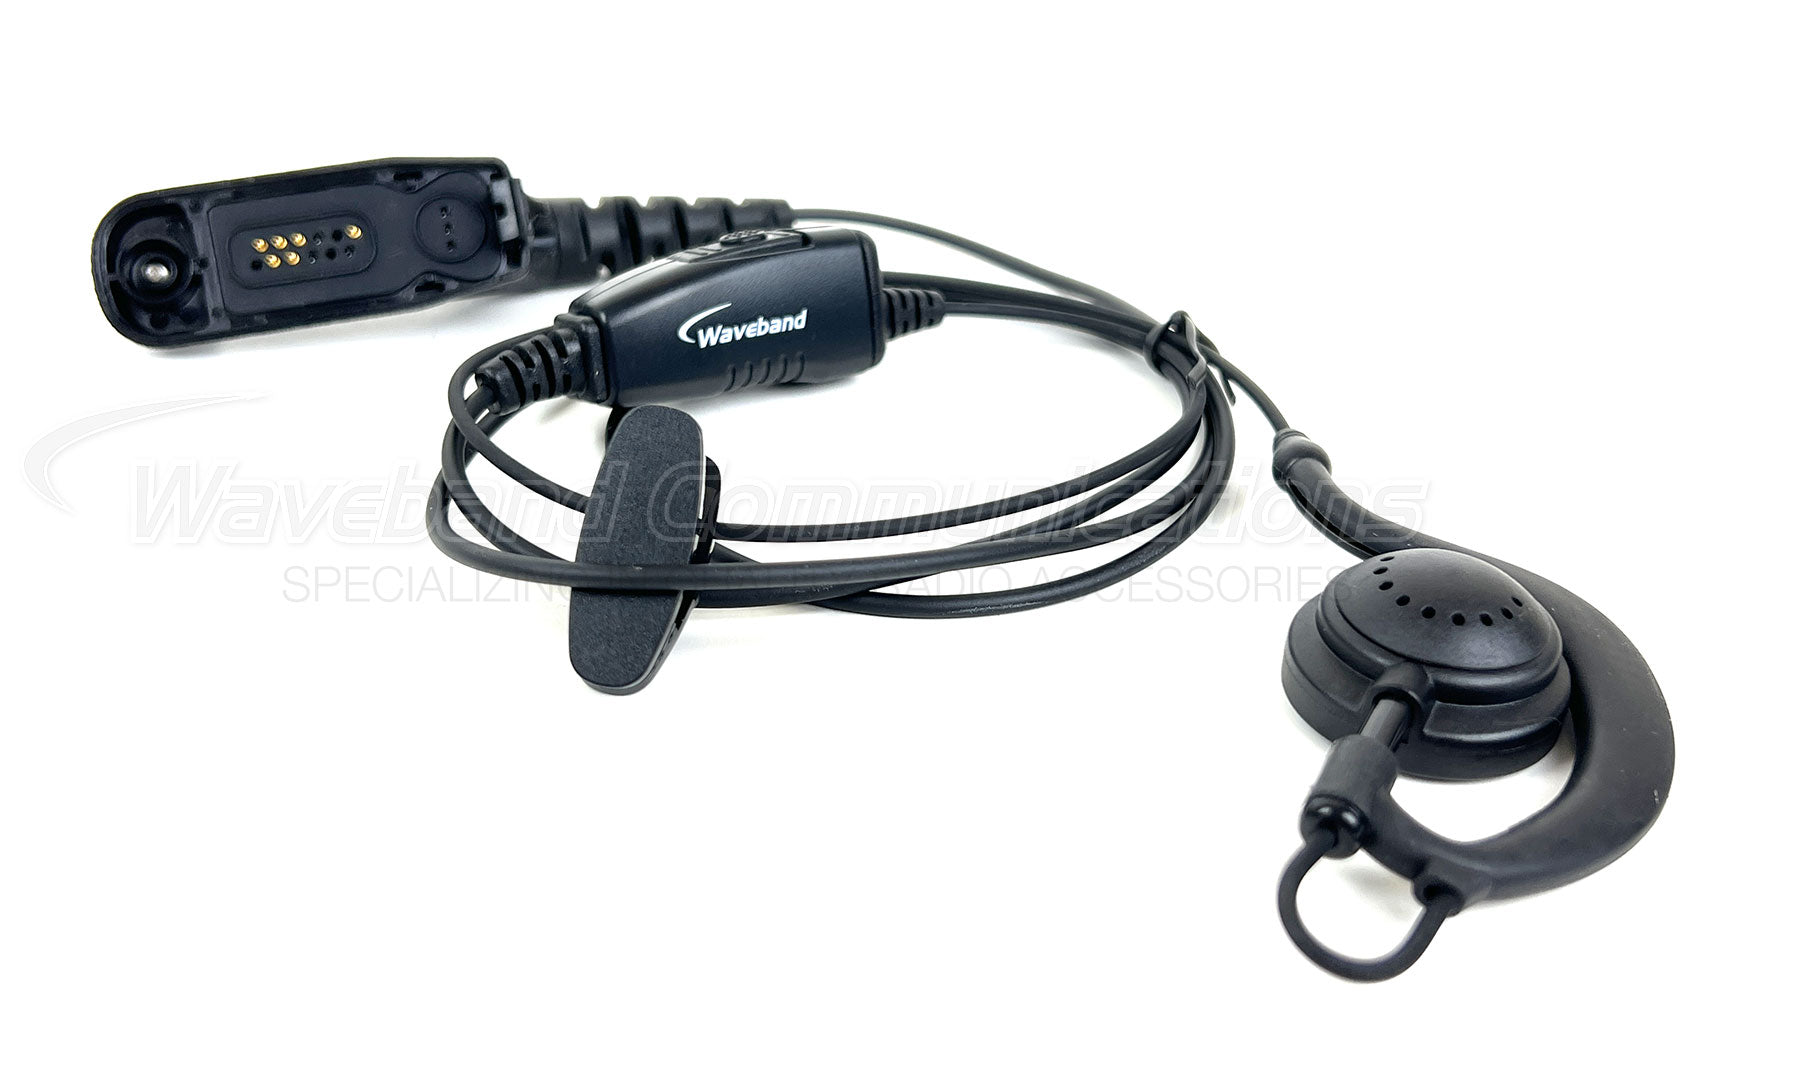 Motorola XPR 6550 Surveillance Kit with Loop Over the Ear Earpiece